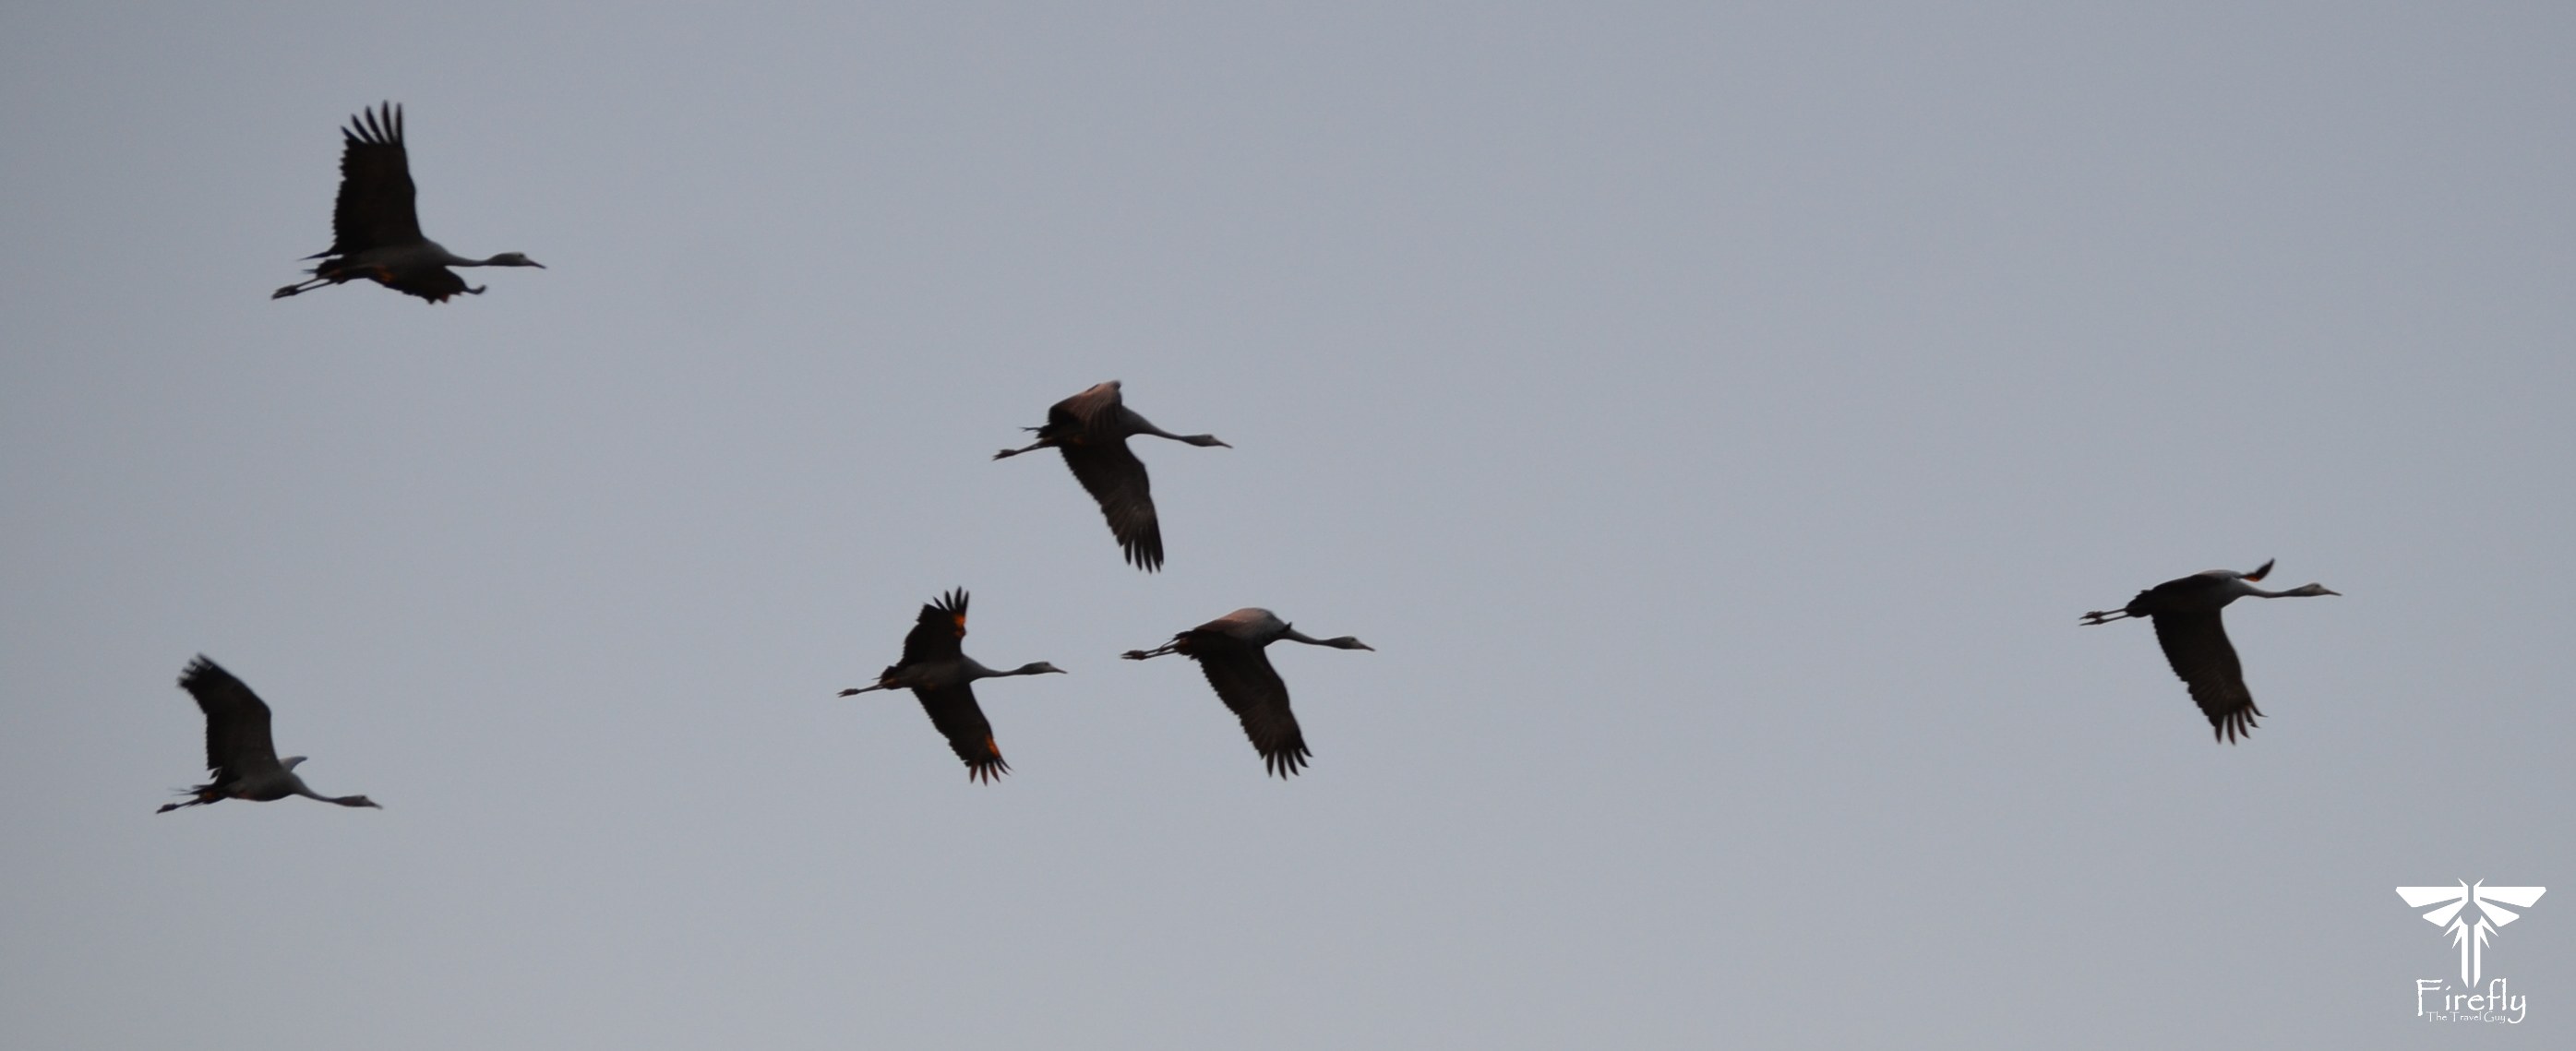 Flight of blue cranes at sunset in the Karoo